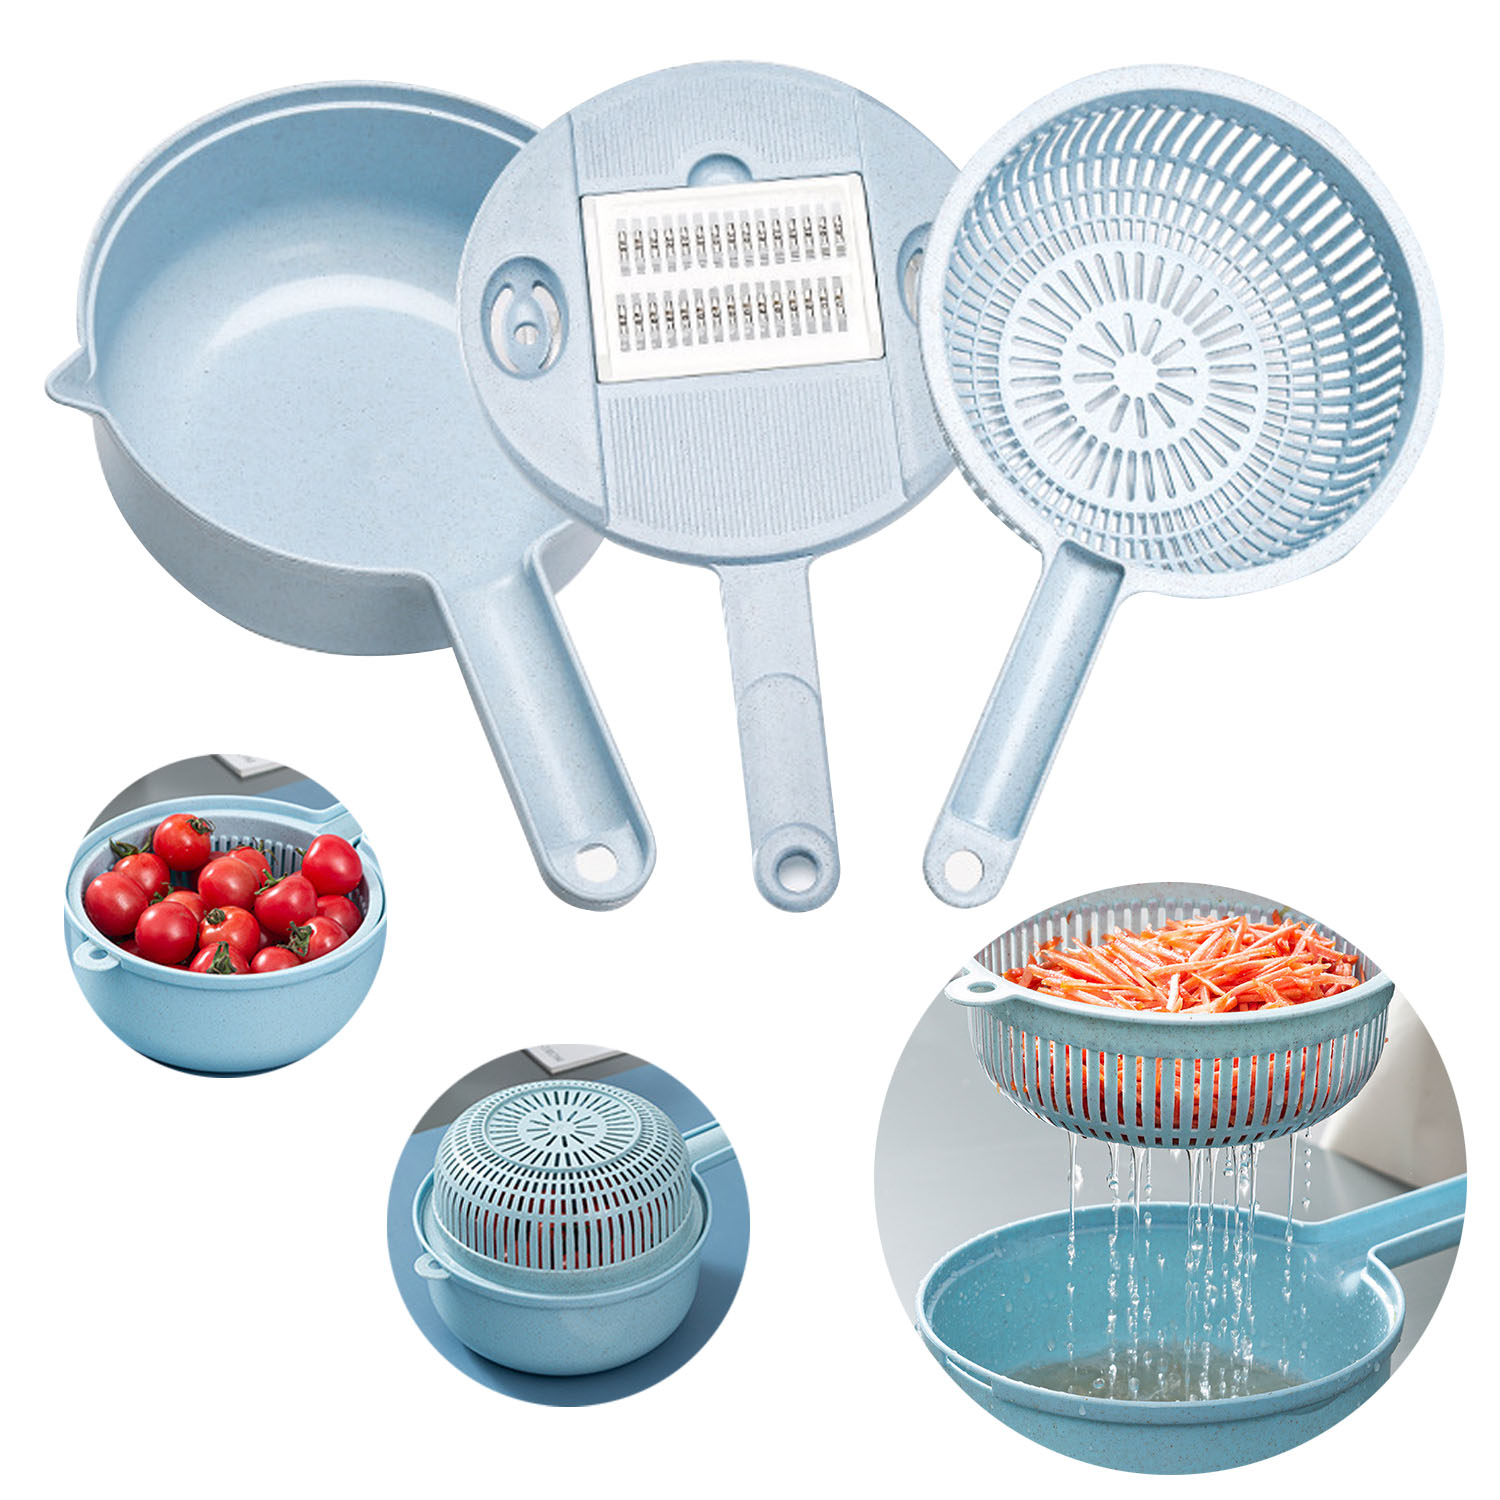 12 Pieces Sets Multi-Function Vegetable Slicer,Onion Mincer Chopper, Vegetable Chopper, Egg Slicer with Container Fruit Kitchen Grater